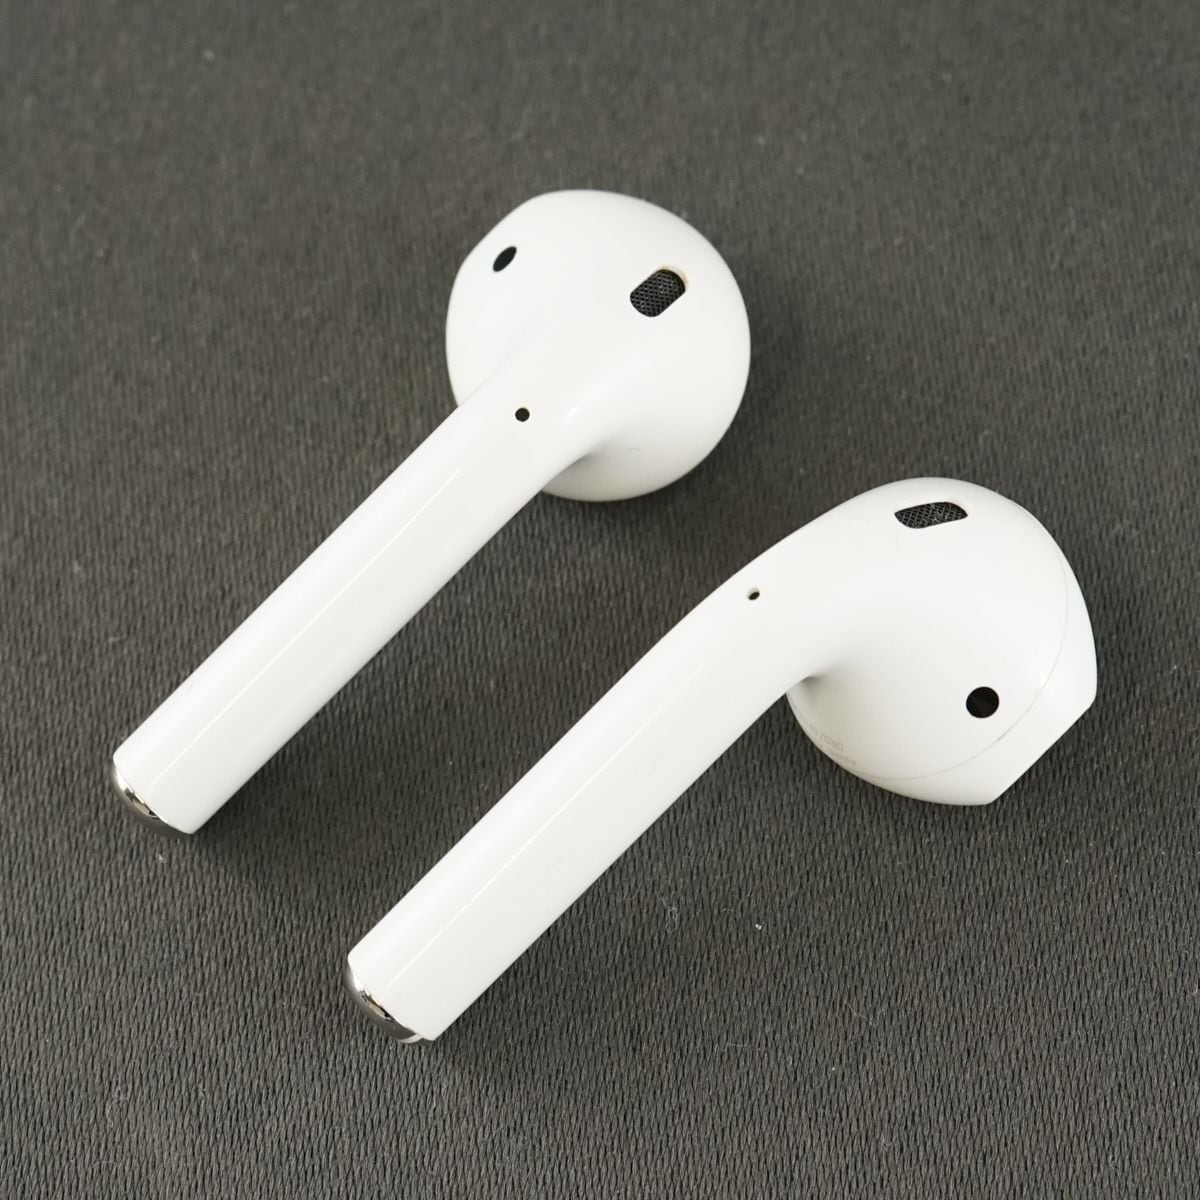 Apple AirPods with Charging Case エアーポッズ ワイヤレスイヤホン